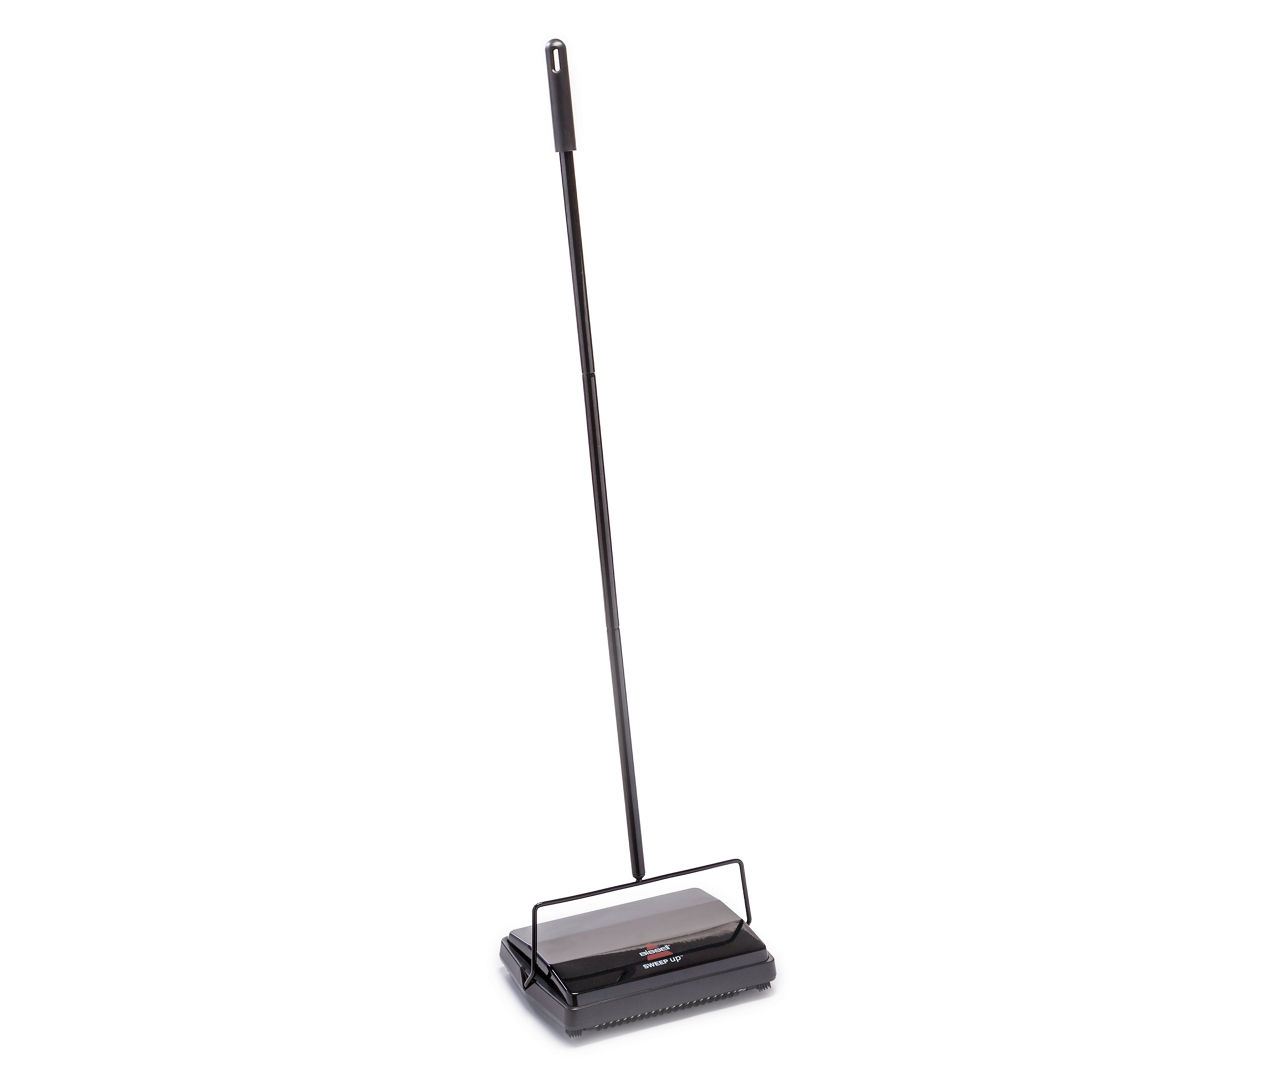 Large Capacity Dirt Pan Picks Up Lint Lightweight with Advanced Dirtlifter Brush System Bissell Sweep-Up Carpet and Floor Sweeper Pet Hairs From Carpets and Convenient Lie Flat Handle Blue floors and Laminates and Soft Bumper Is Safe On Walls Dust 